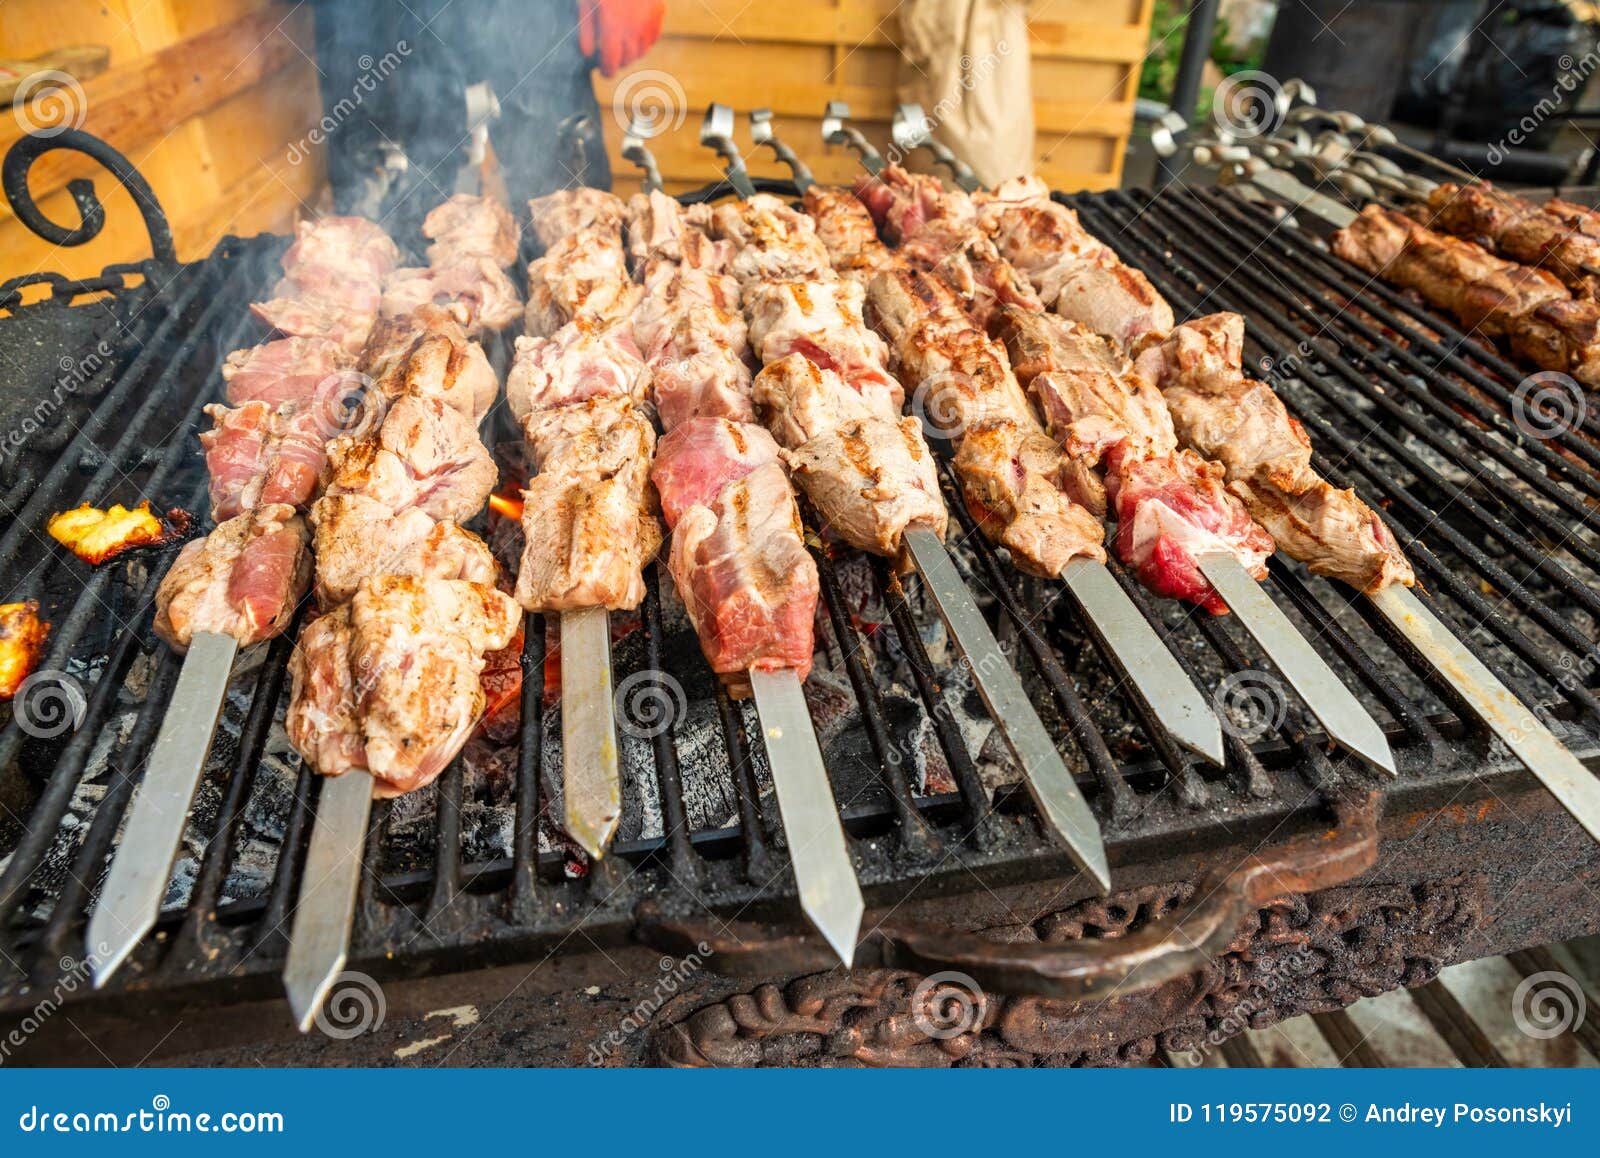 Meat on Skewers an Open Fire Stock Photo - Image of kitchen, flame ...